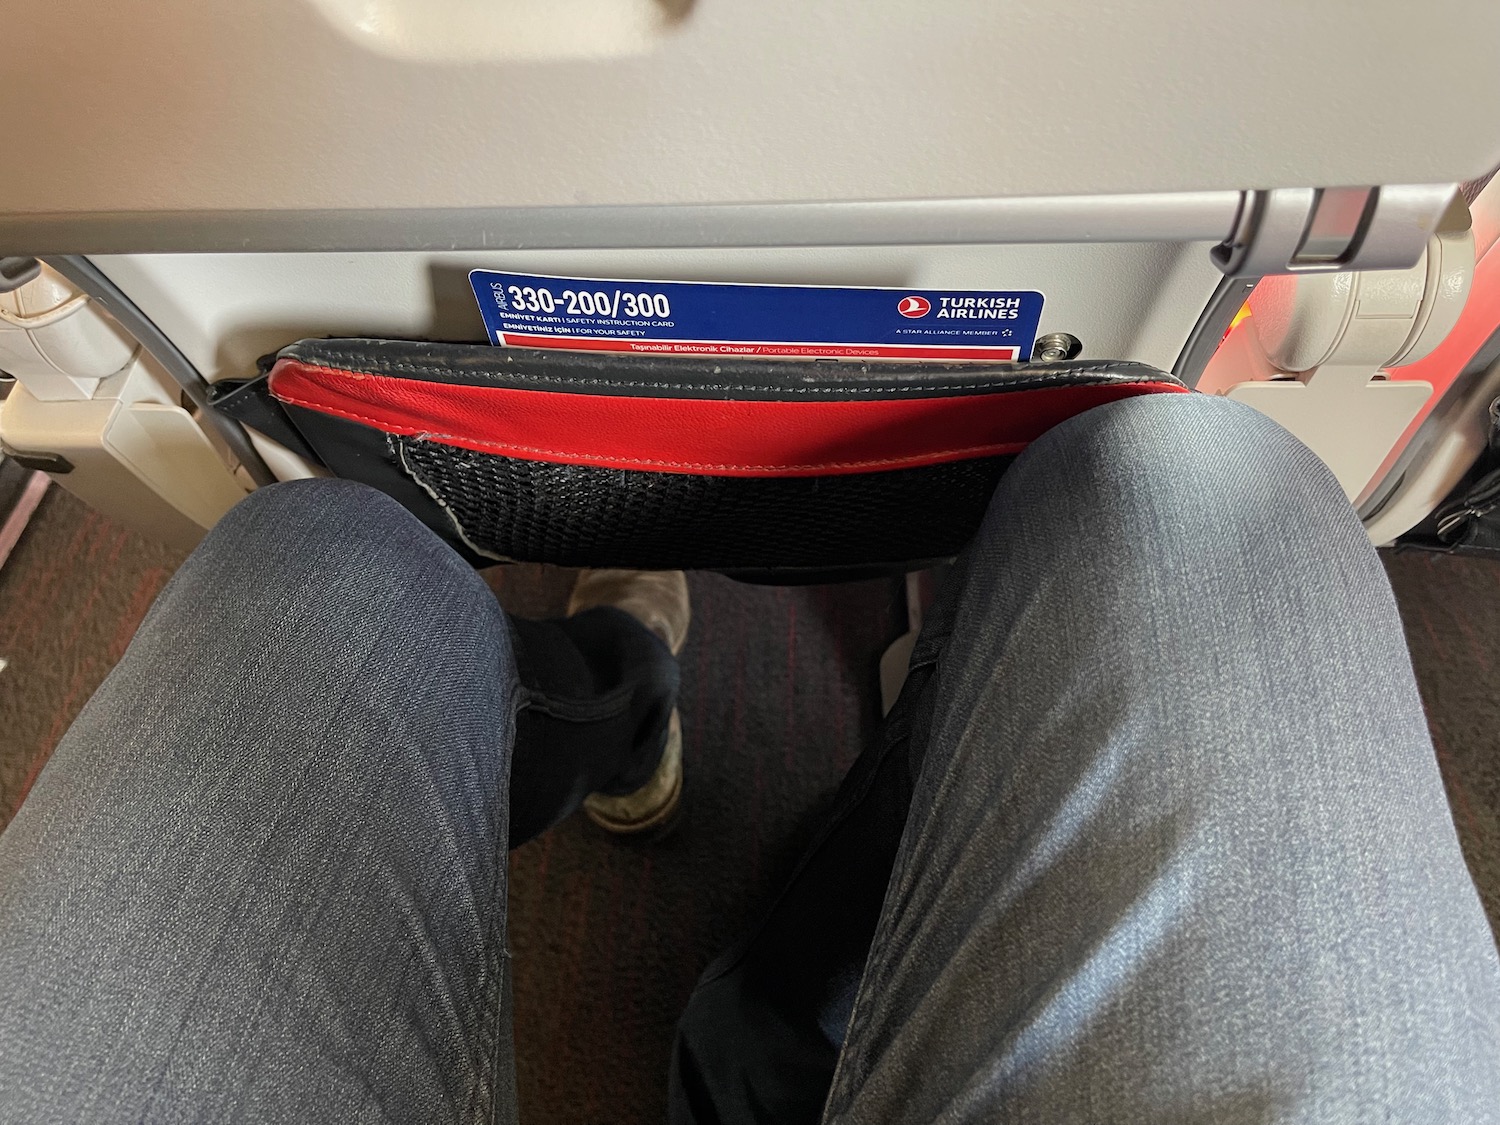 a person's legs and a pocket in a seat